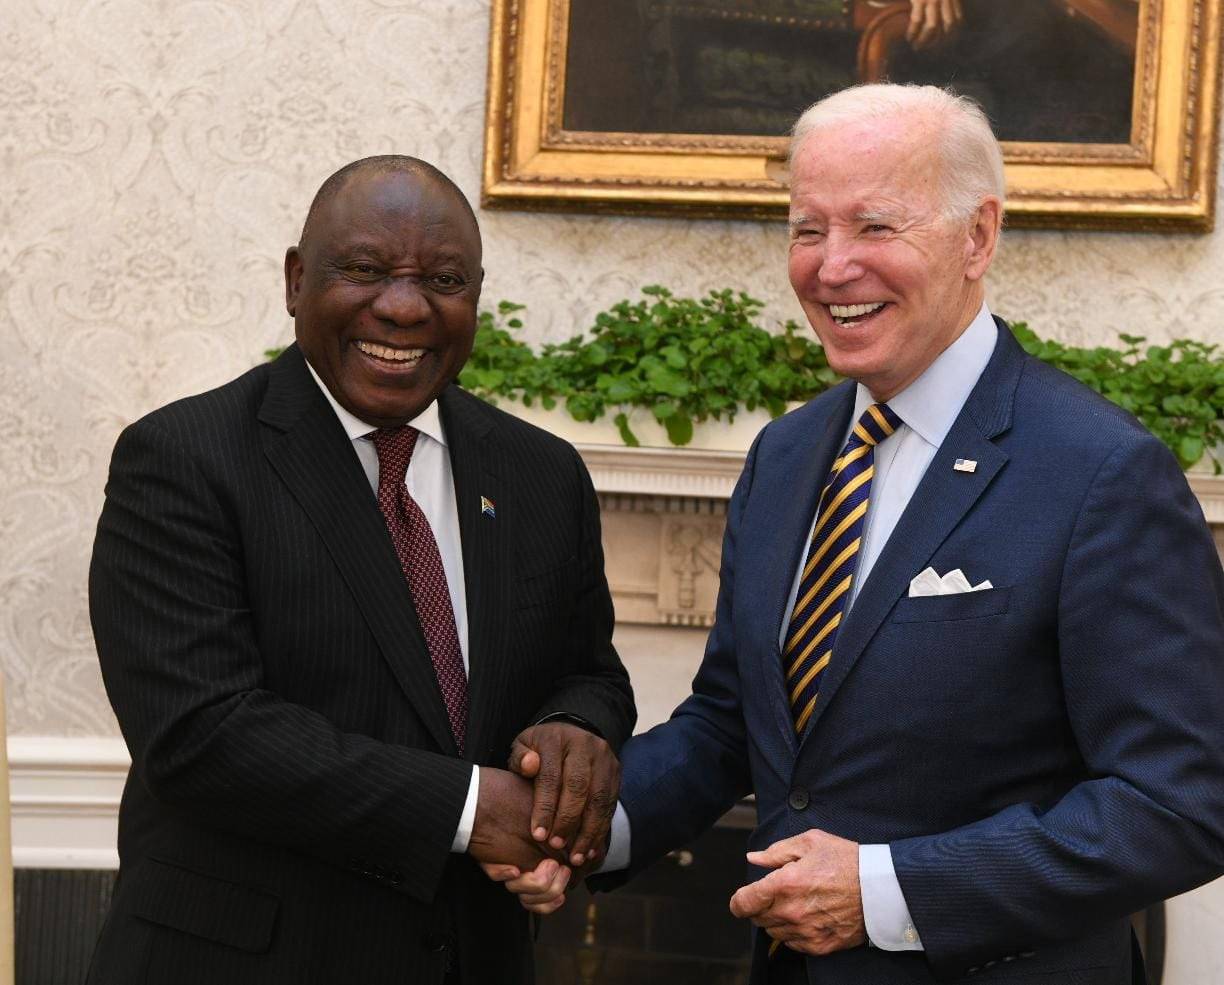 President Cyril Ramaphosa and US President Joe Biden during a meeting at the White House in Washington DC. (Photo: The Presidency)